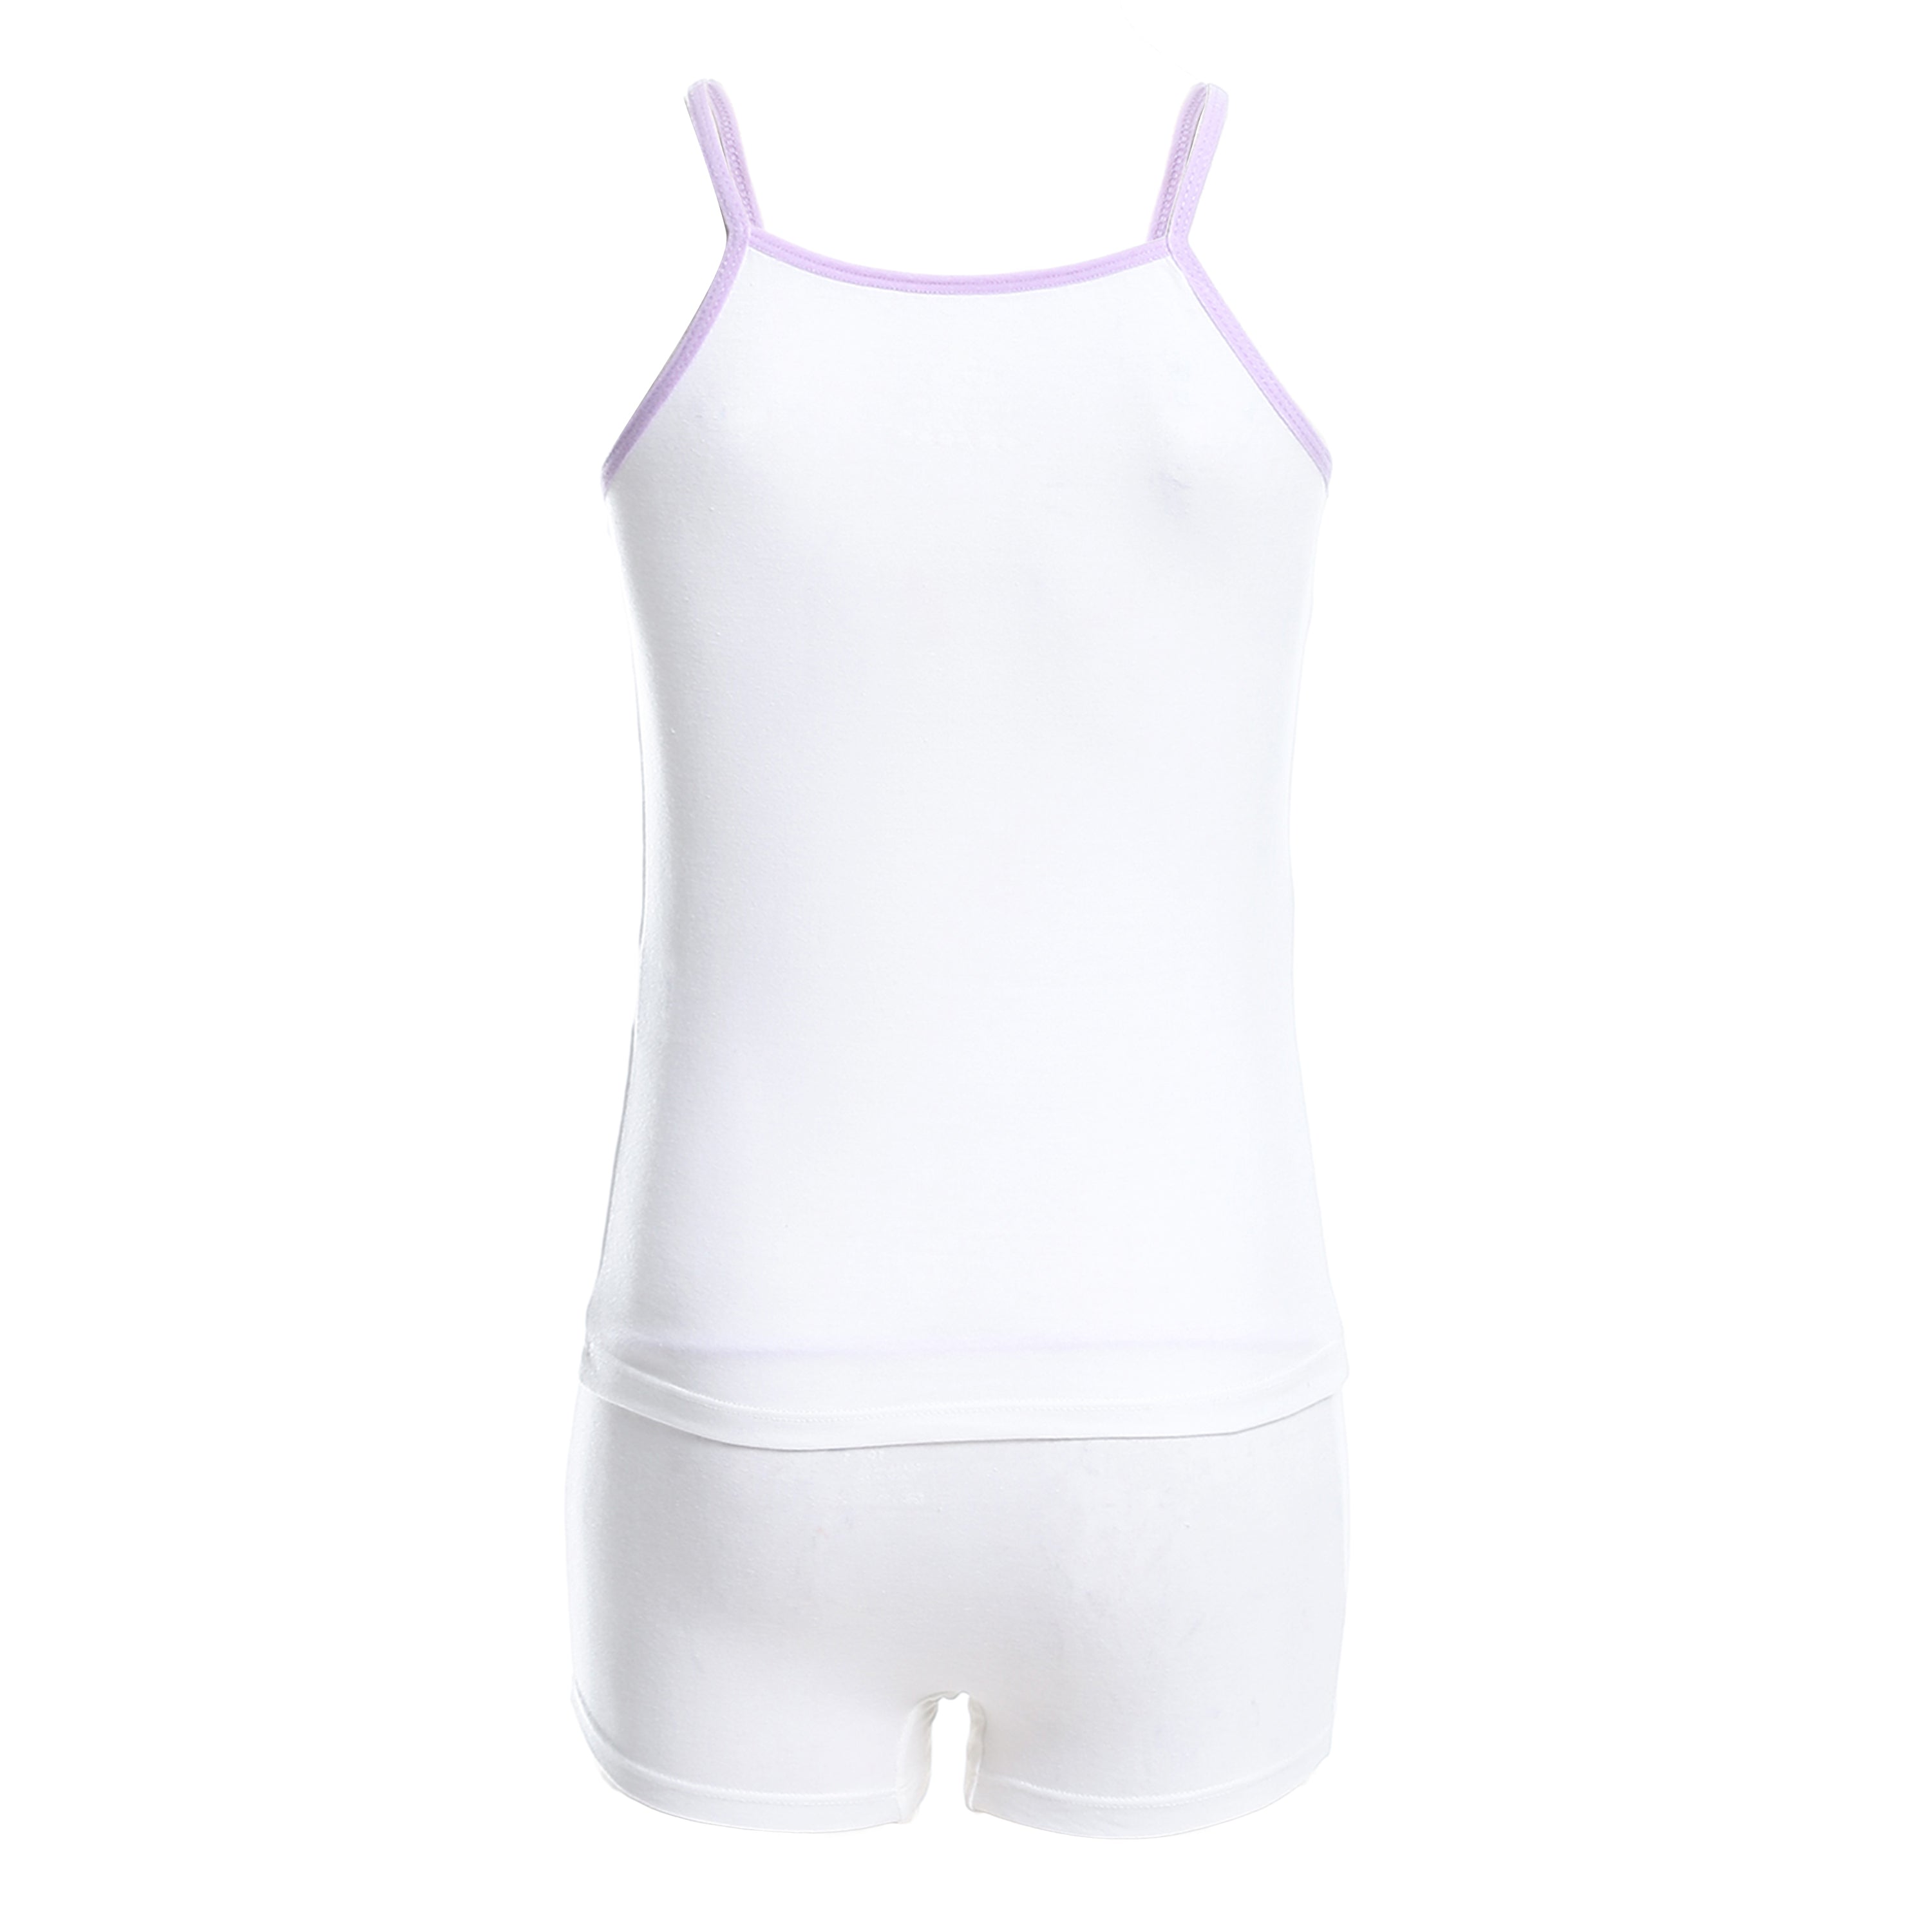 Girls' Hot short and top set - White